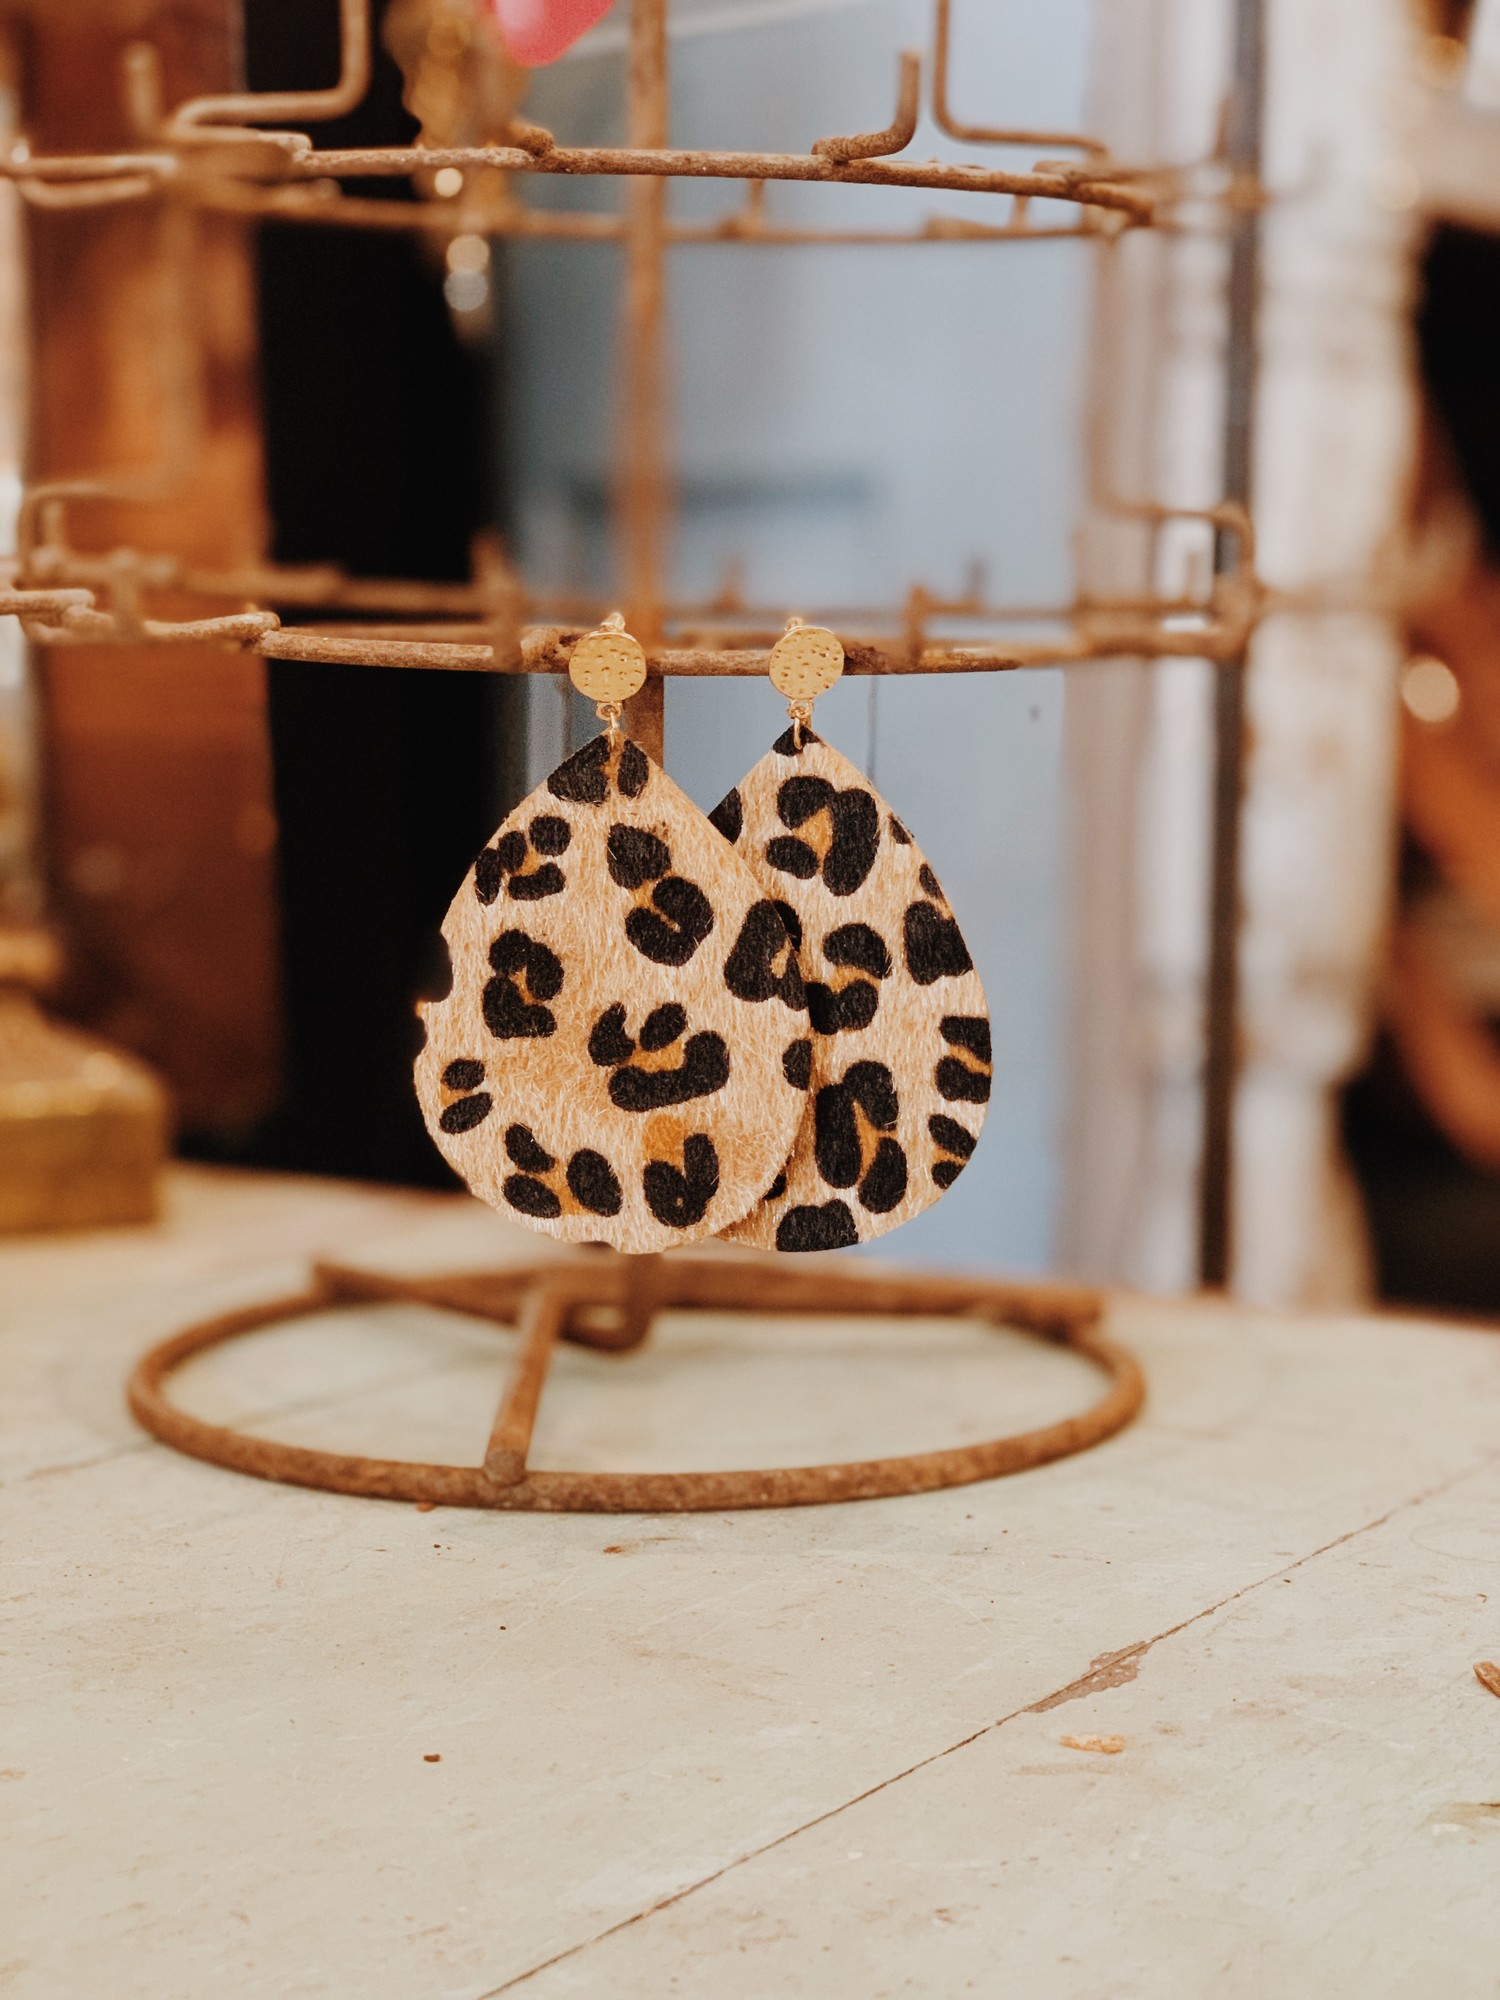 Cheetah is the best neutral for any outfit, which means these cheetah print teardrop earrings will top off that outfit you had planned perfectly!